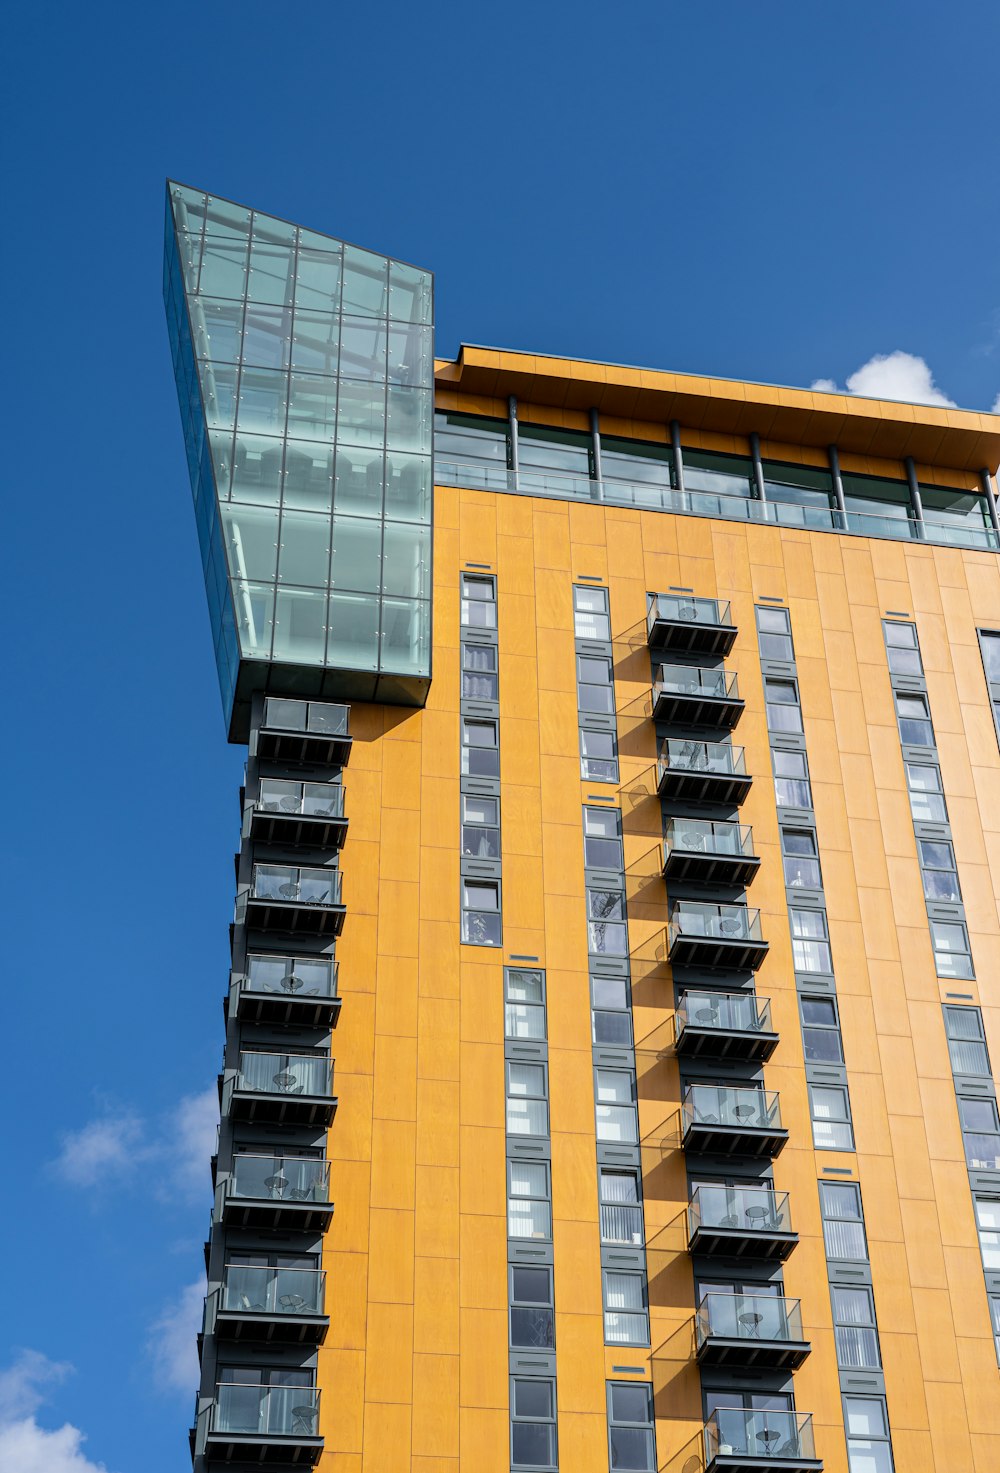 a tall yellow building with balconies against a blue sky